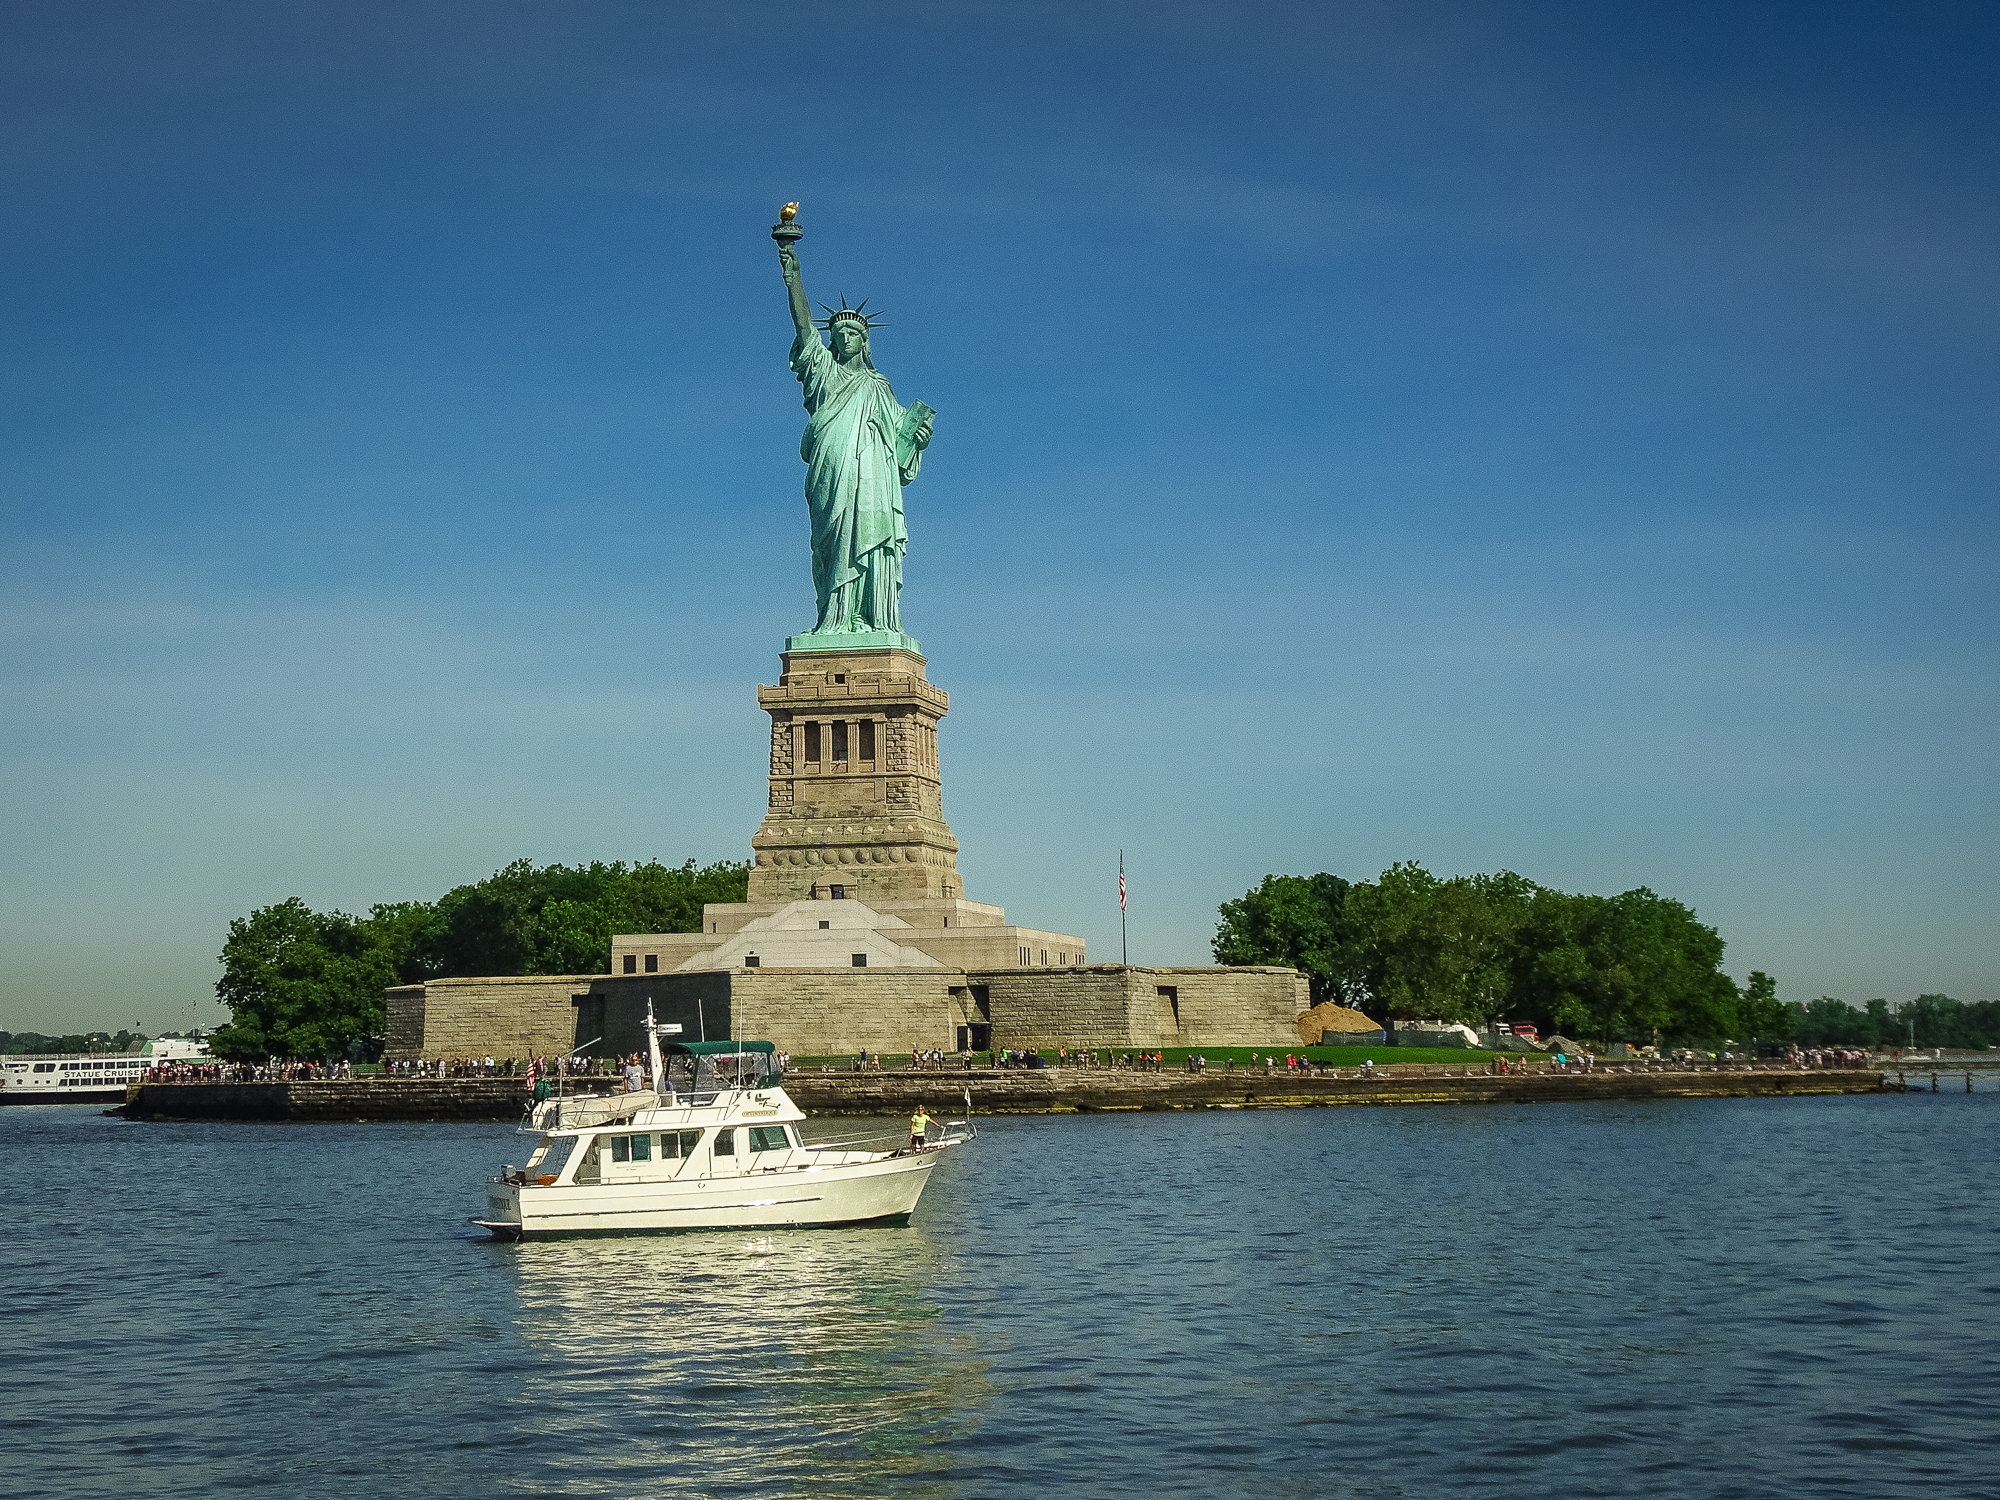 Can You Swim In The Hudson River By The Statue Of Liberty Cruising The Big Apple And The Hudson Rivercommuter Cruiser Commuter Cruiser